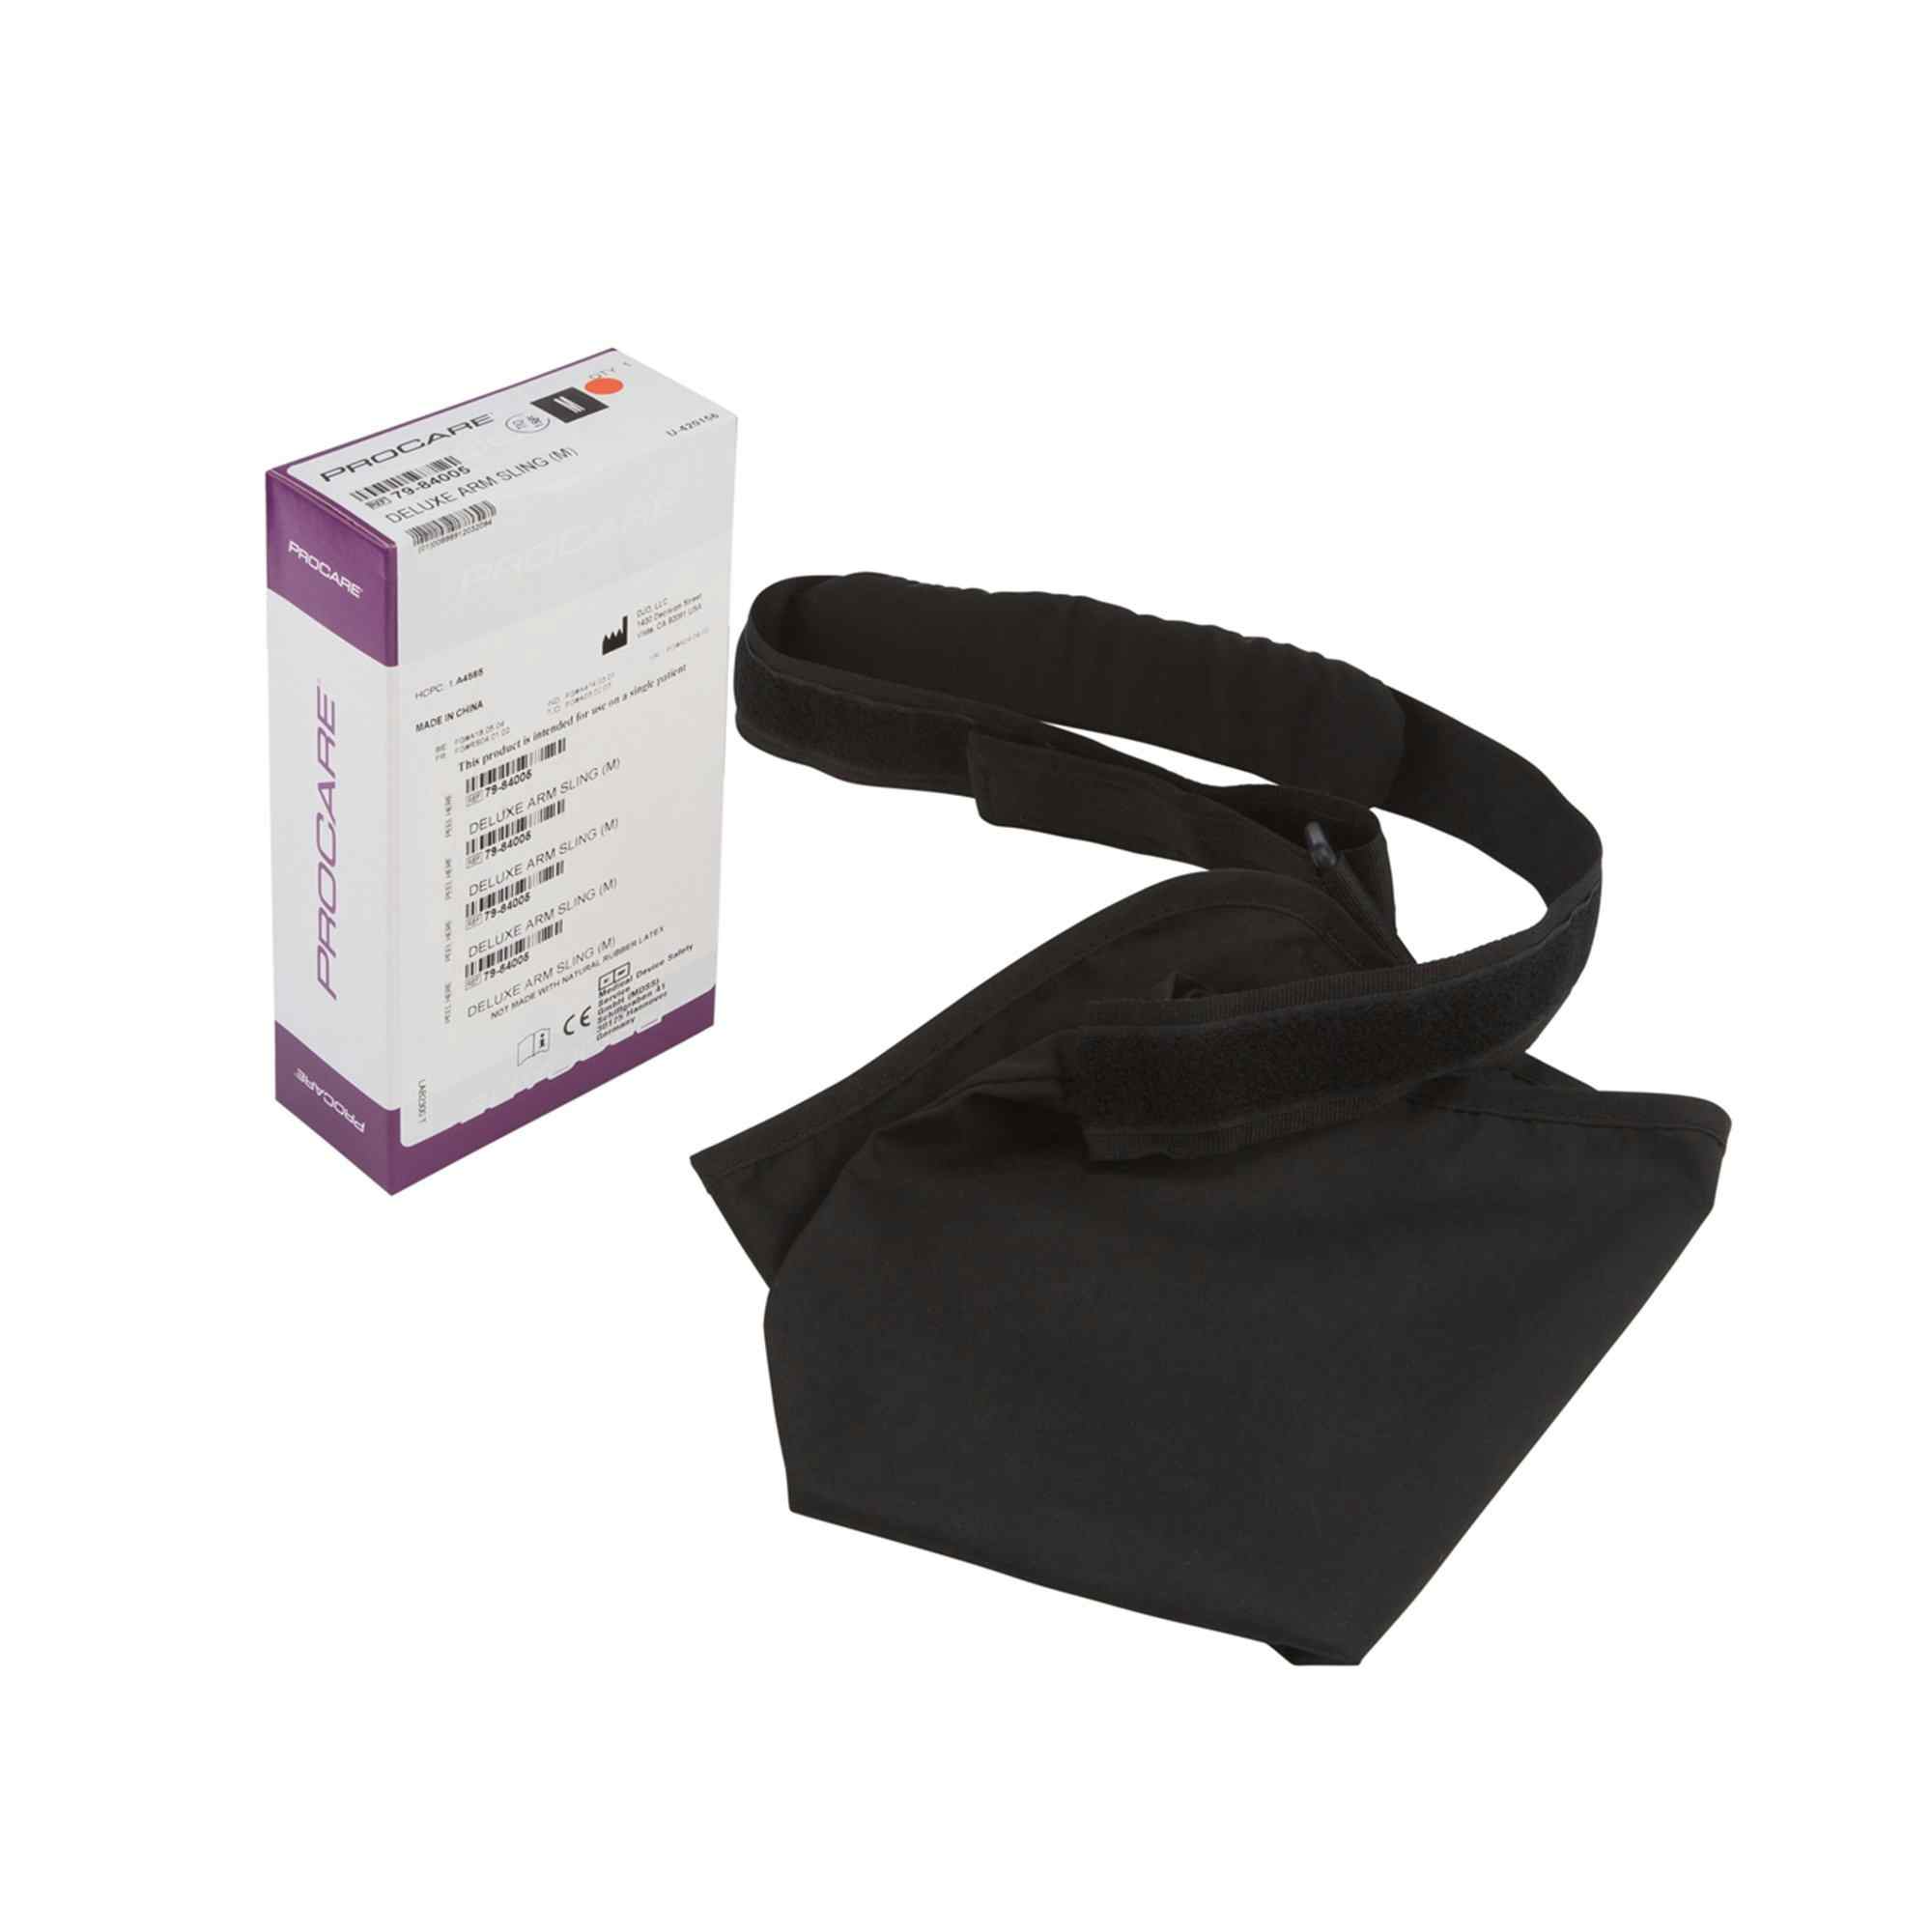 Procare Deluxe Arm Sling, 79-84005, Medium (8 X 15") - 1 Each